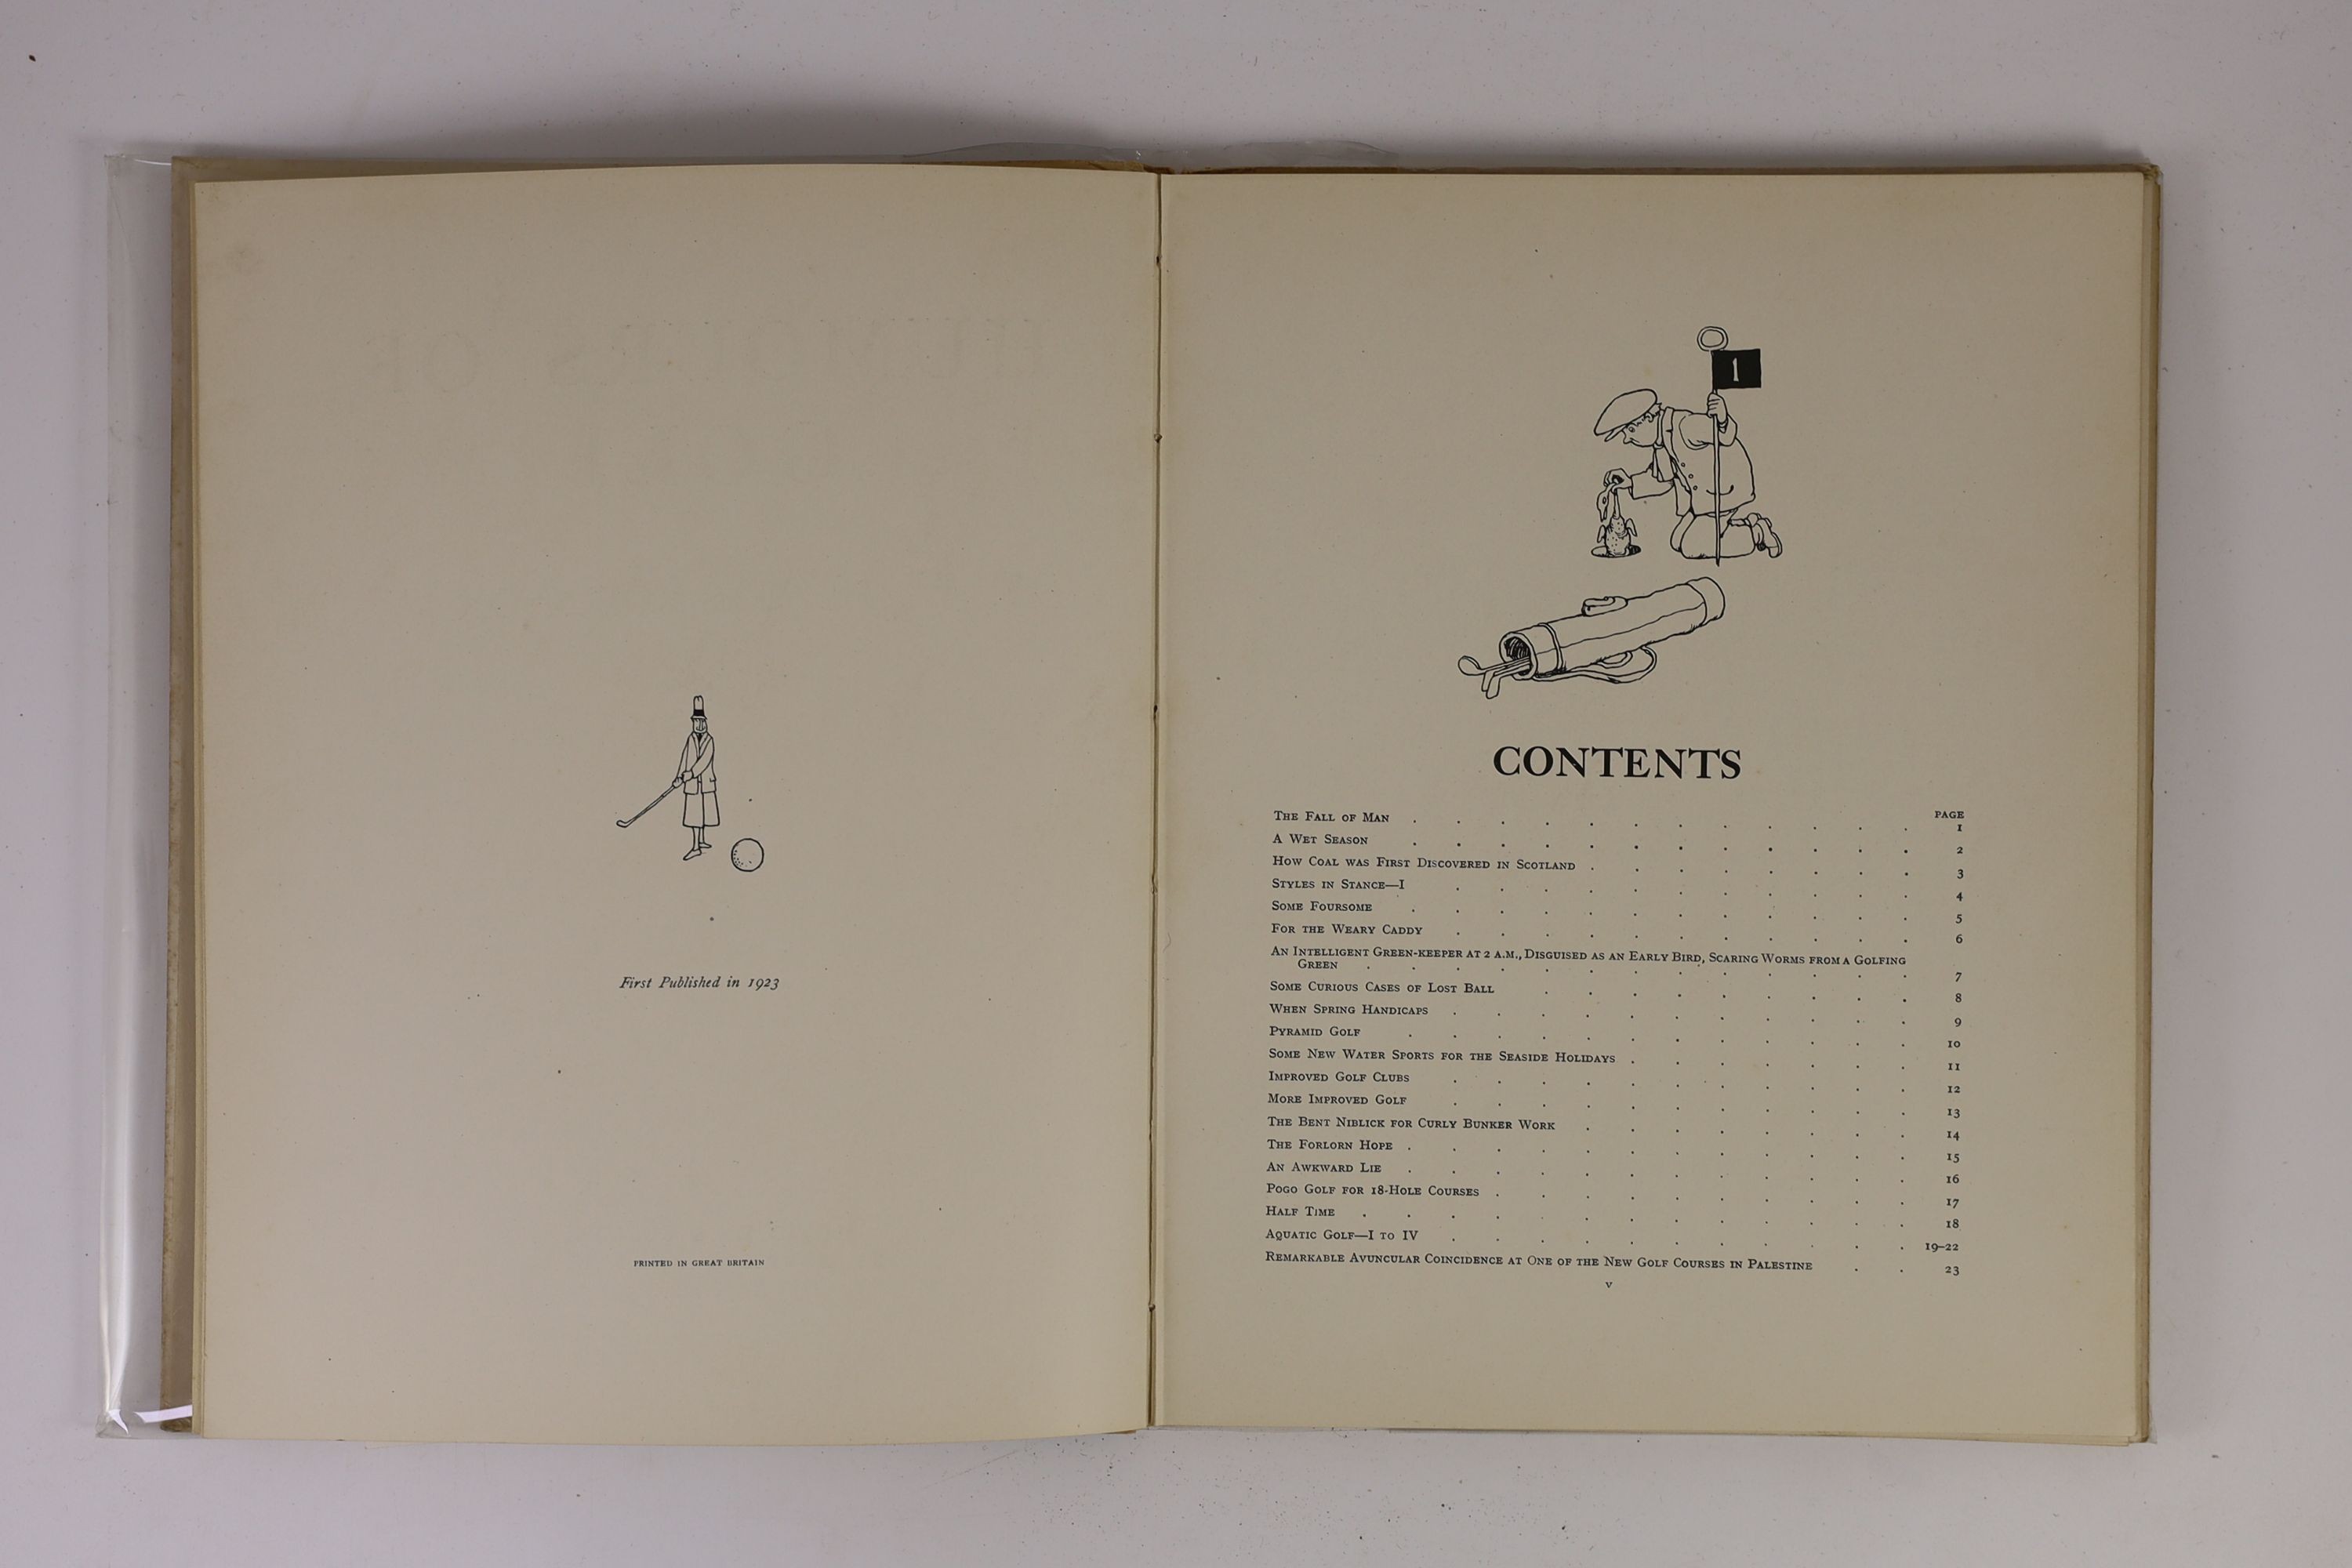 Robinson, W. Heath - Humour of Golf, 1st edition, 4to, original pictorial boards, with 50 illustrations, Methuen & Co., London, 1923